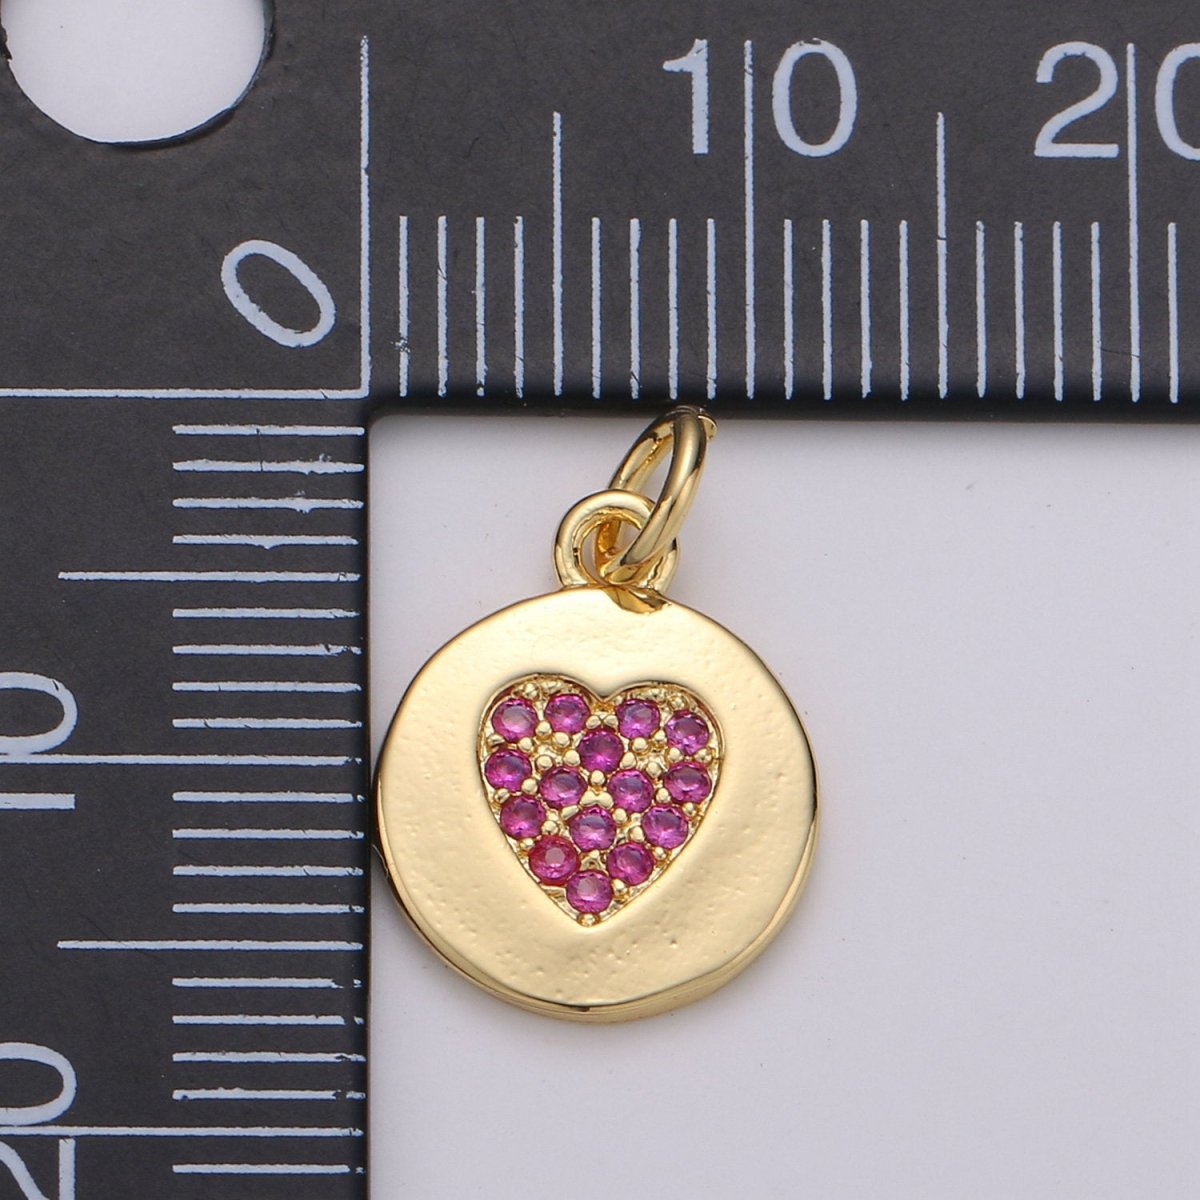 Dainty Gold Heart Charm, Disc Coin Charm gold Pendant, Minimalist Jewelry Making in 24k Gold Filled Findings for Bracelet Earring D-347 - DLUXCA